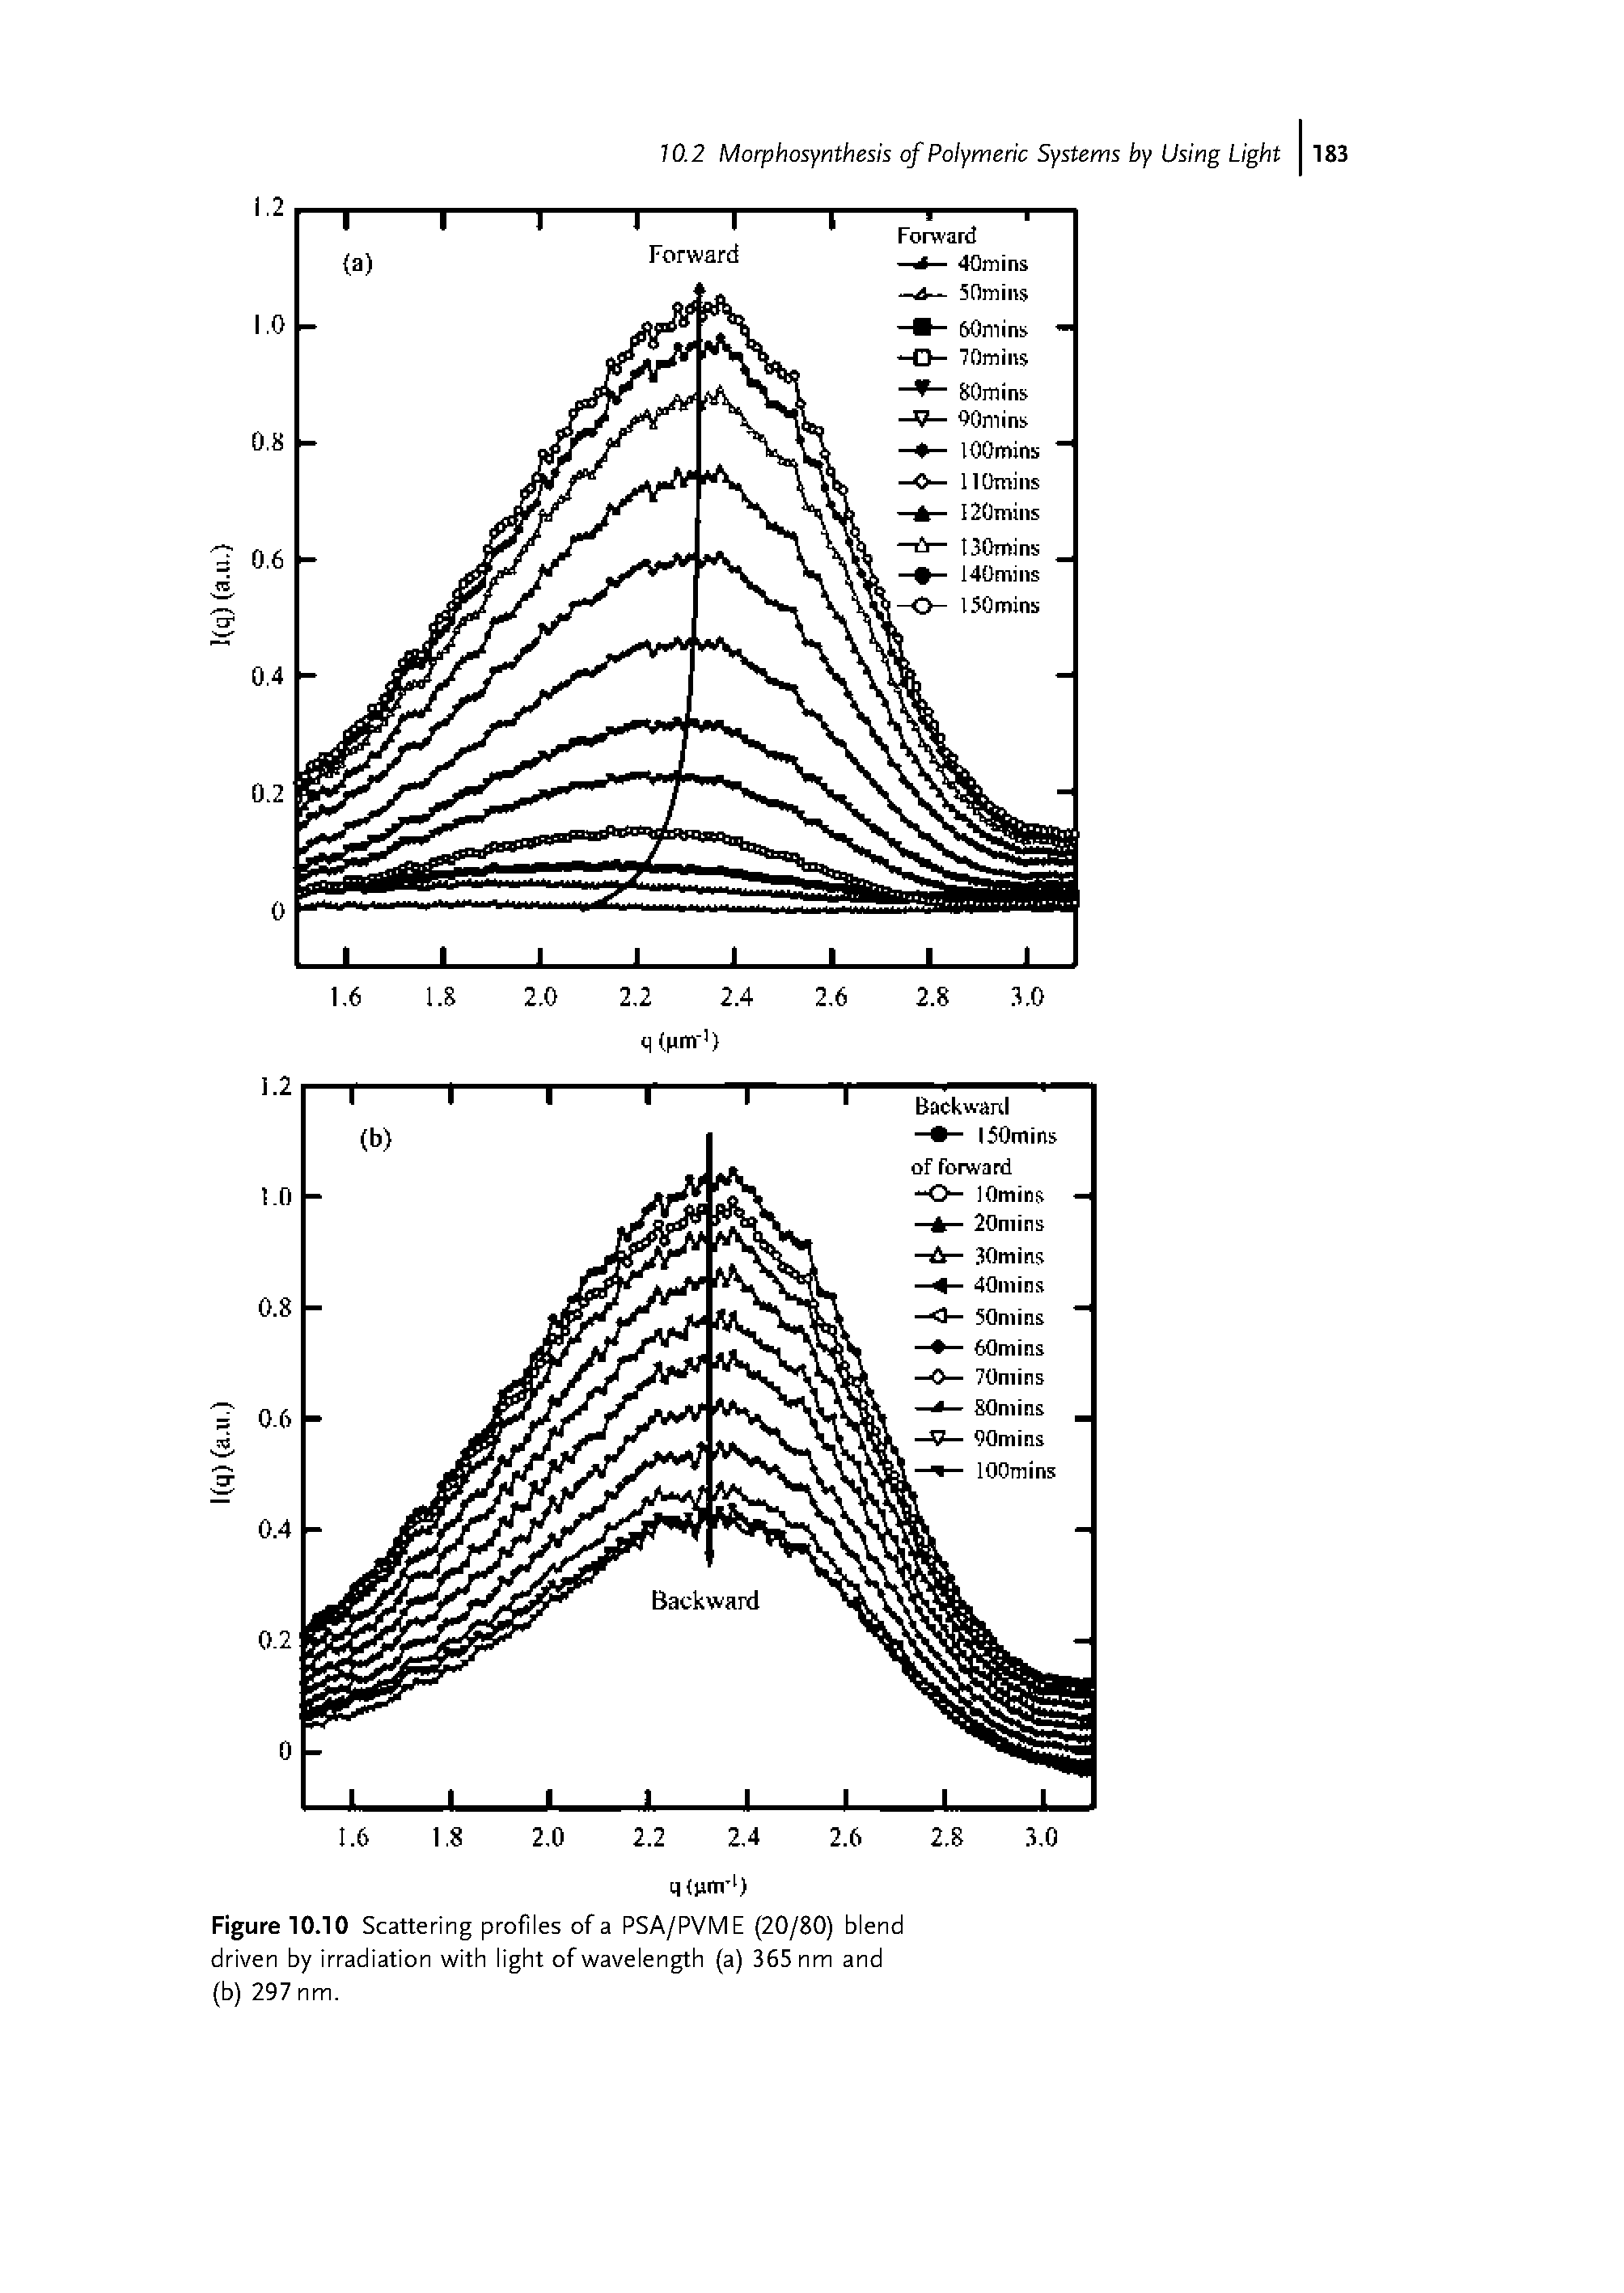 Figure 10.10 Scattering profiles of a PSA/PVME (20/80) blend driven by irradiation with light of wavelength (a) 365 nm and (b) 297 nm.